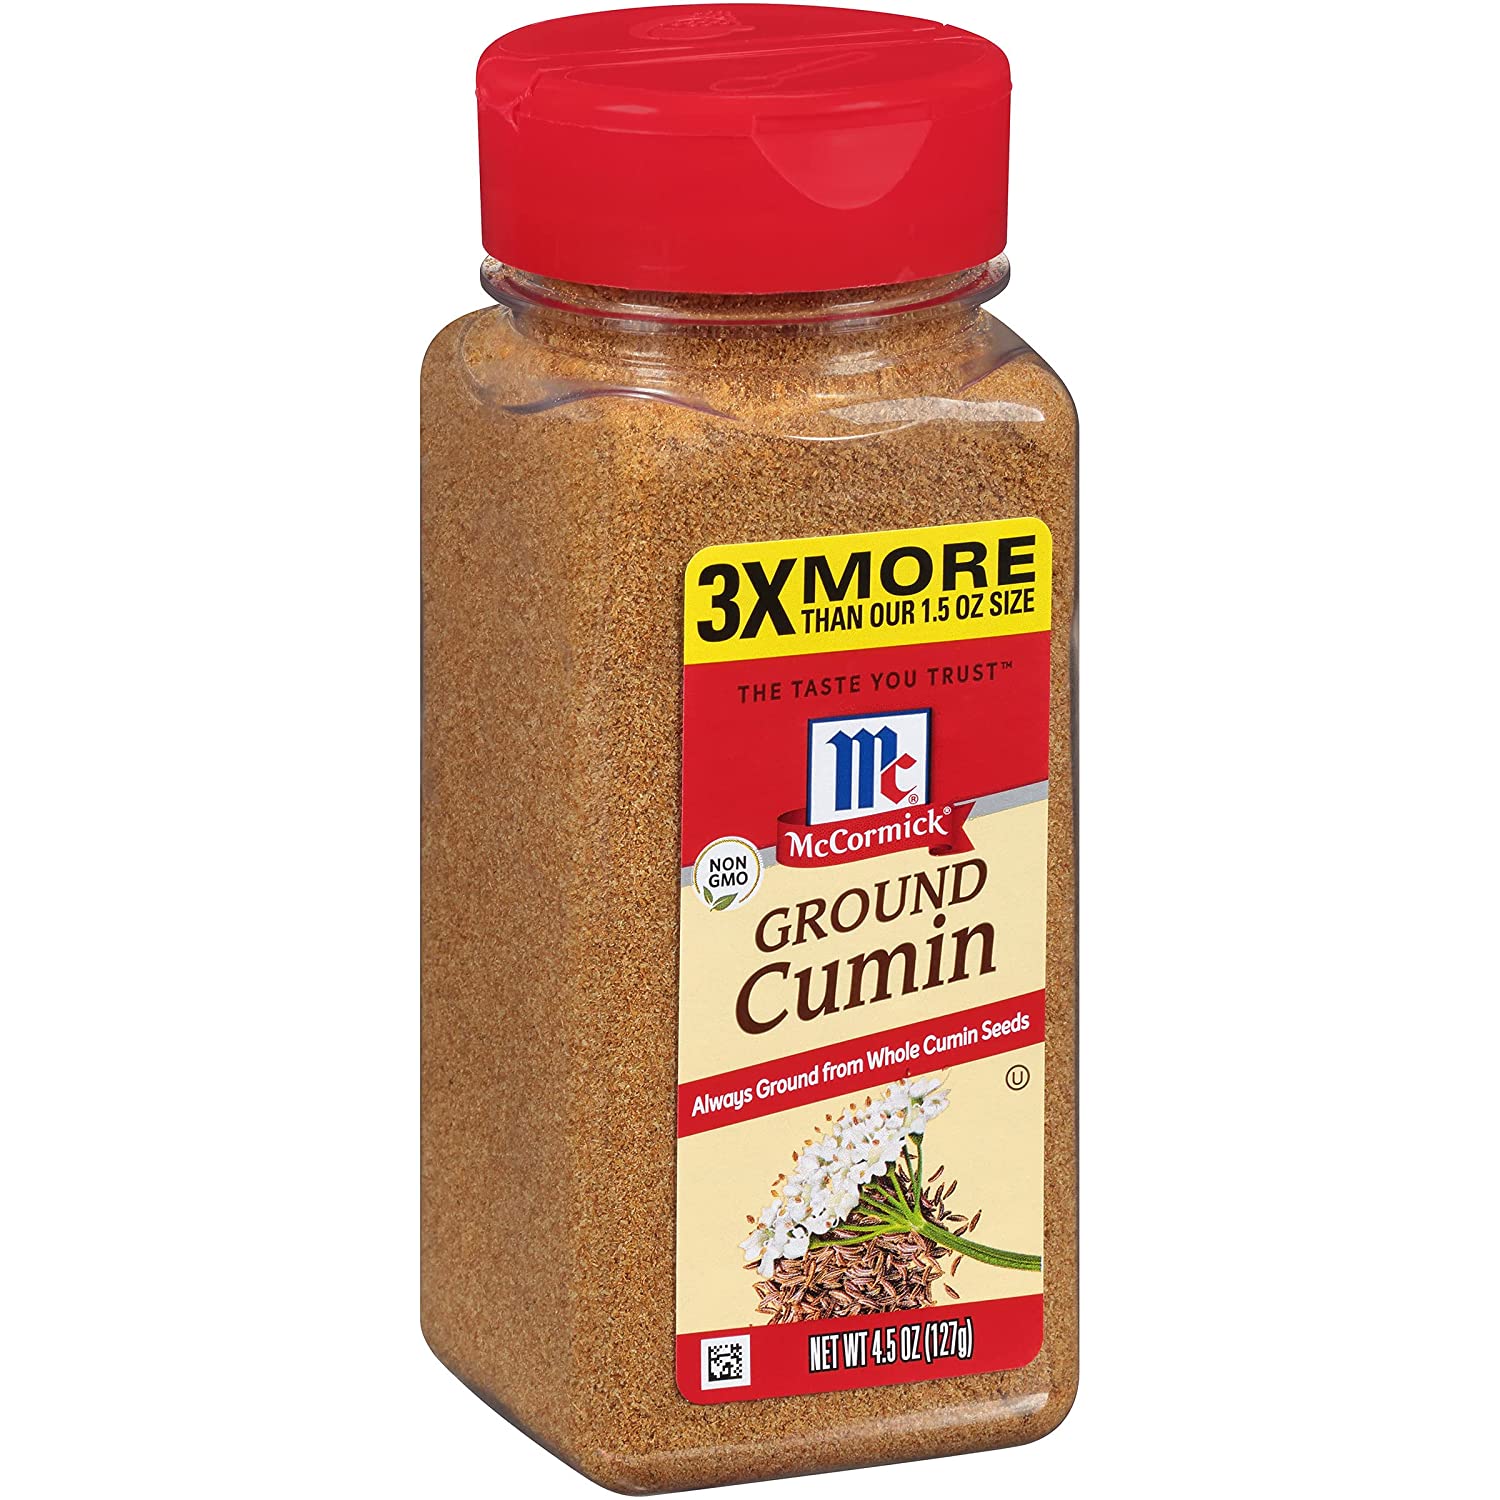 4.5-Oz McCormick Ground Cumin $4.73 w/ S&S + Free Shipping w/ Prime or on orders over $25